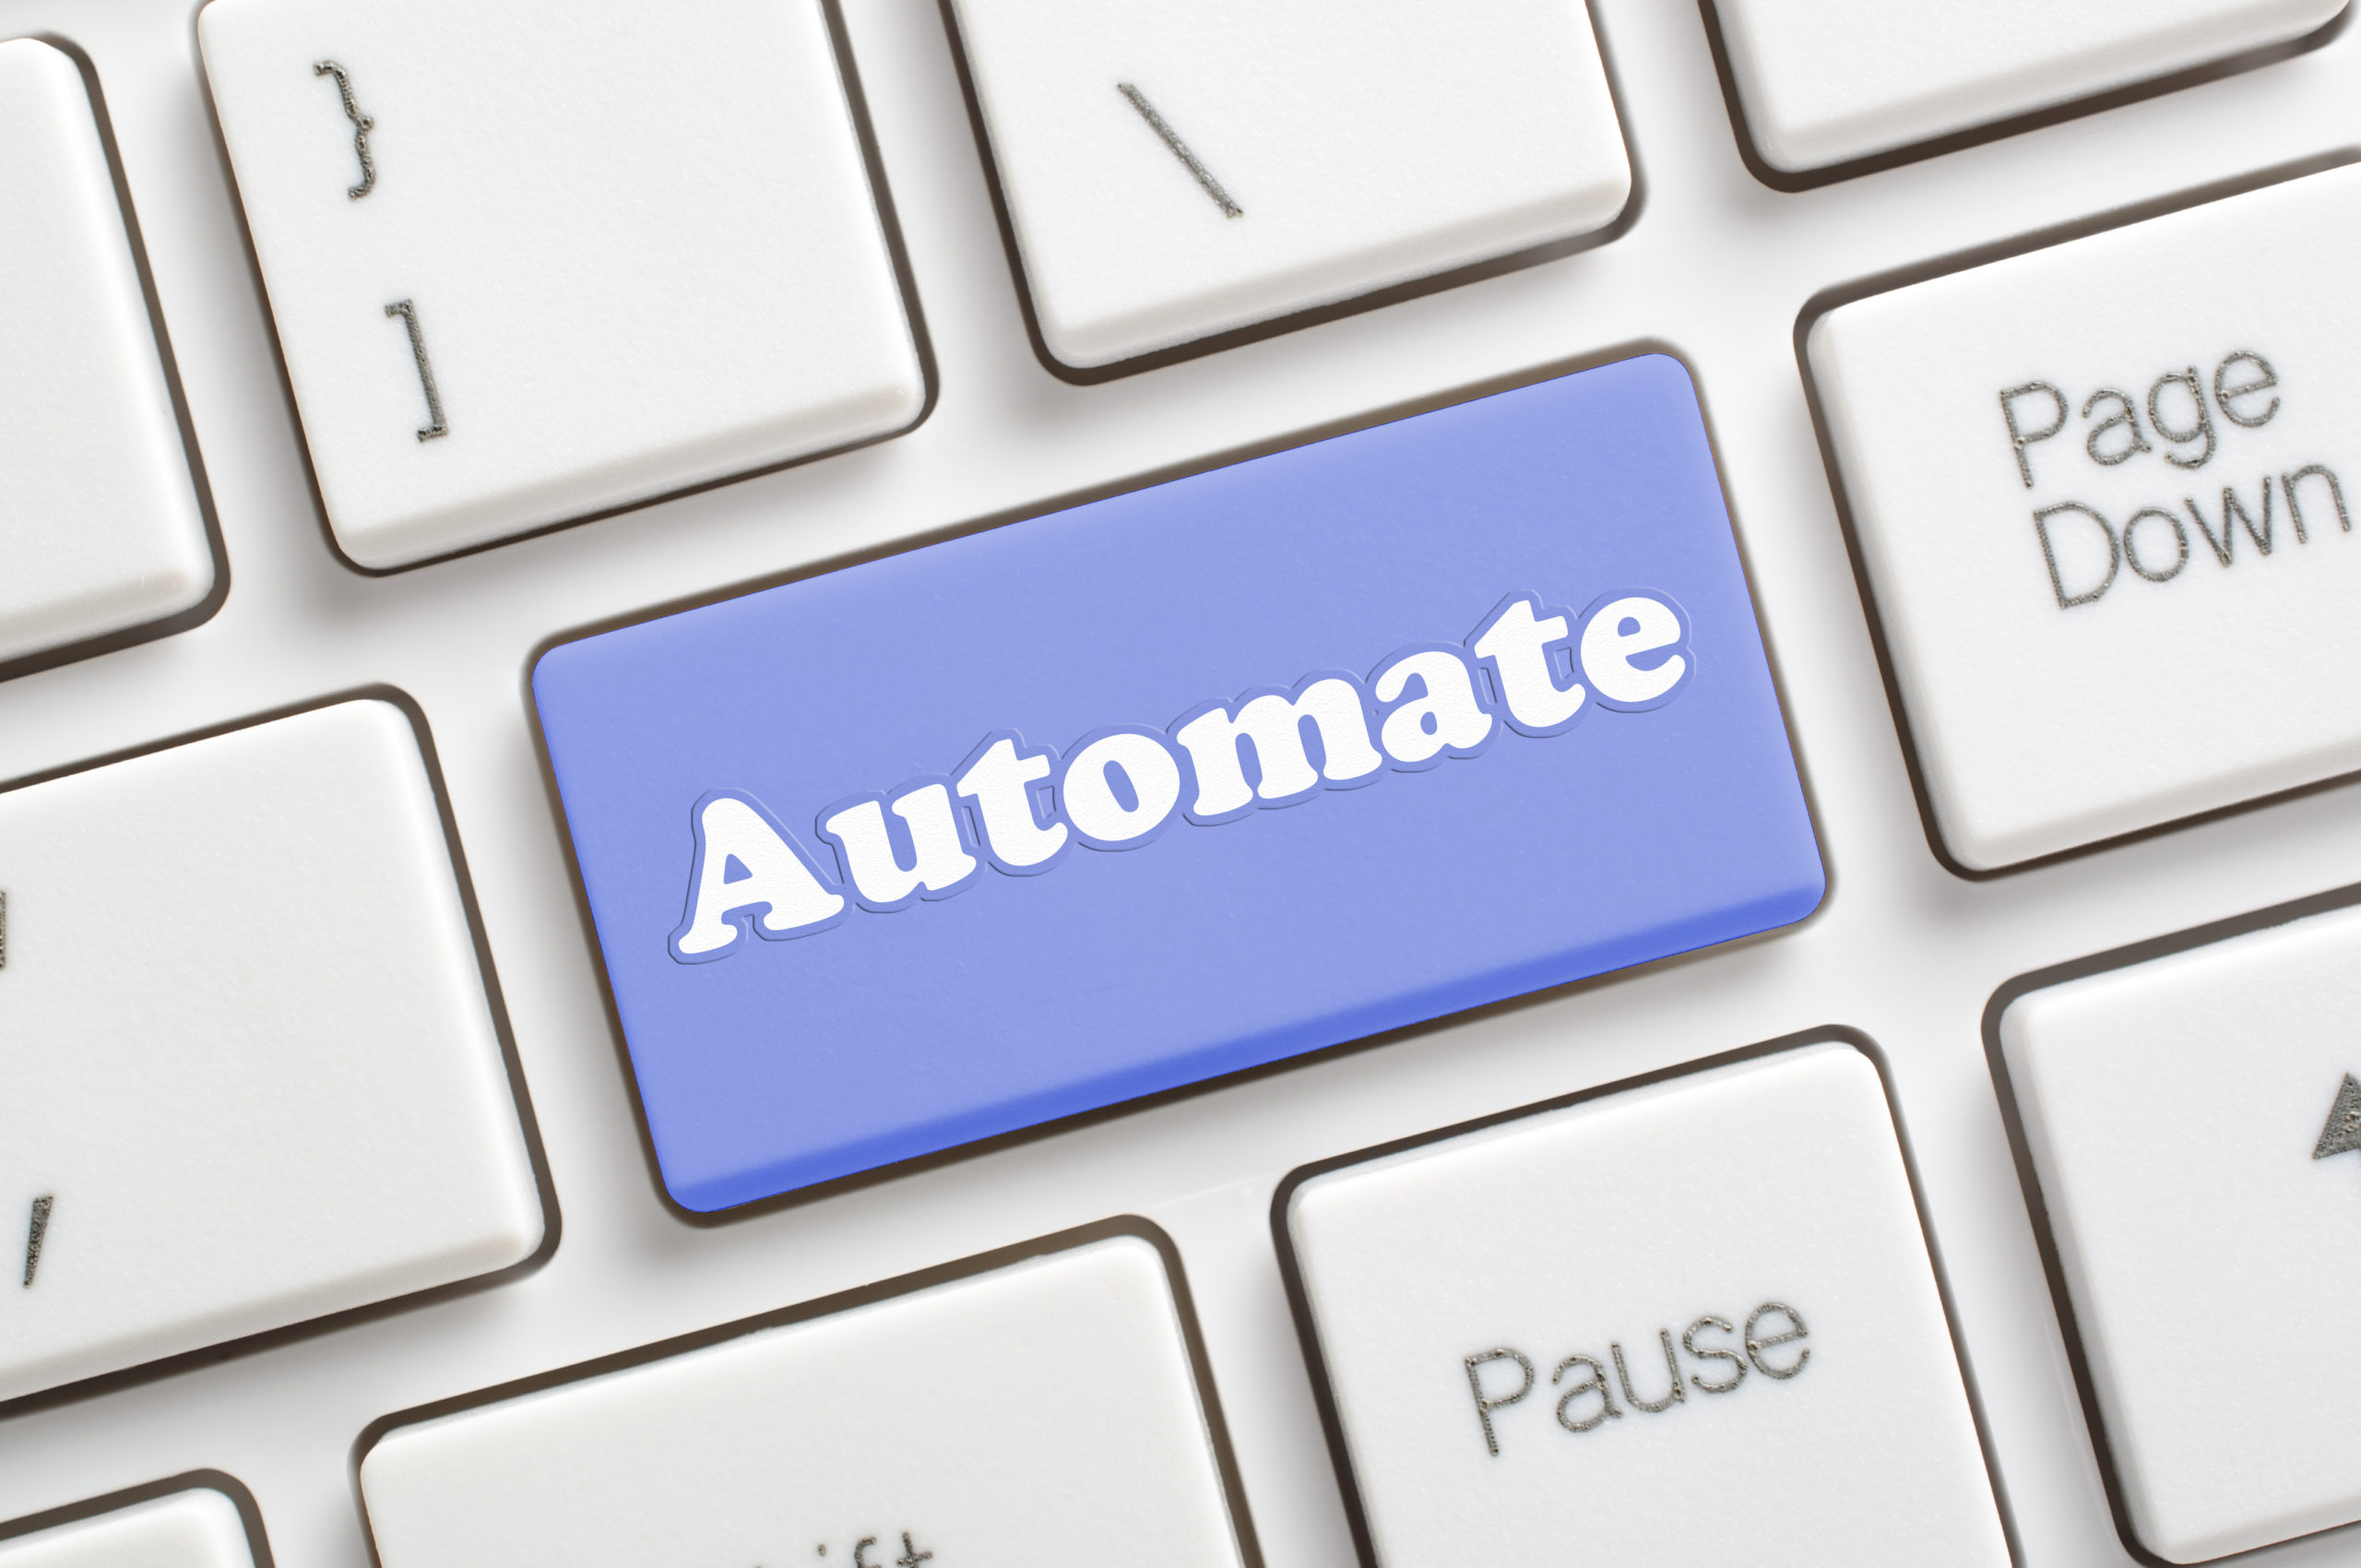 Automate button on keyboard